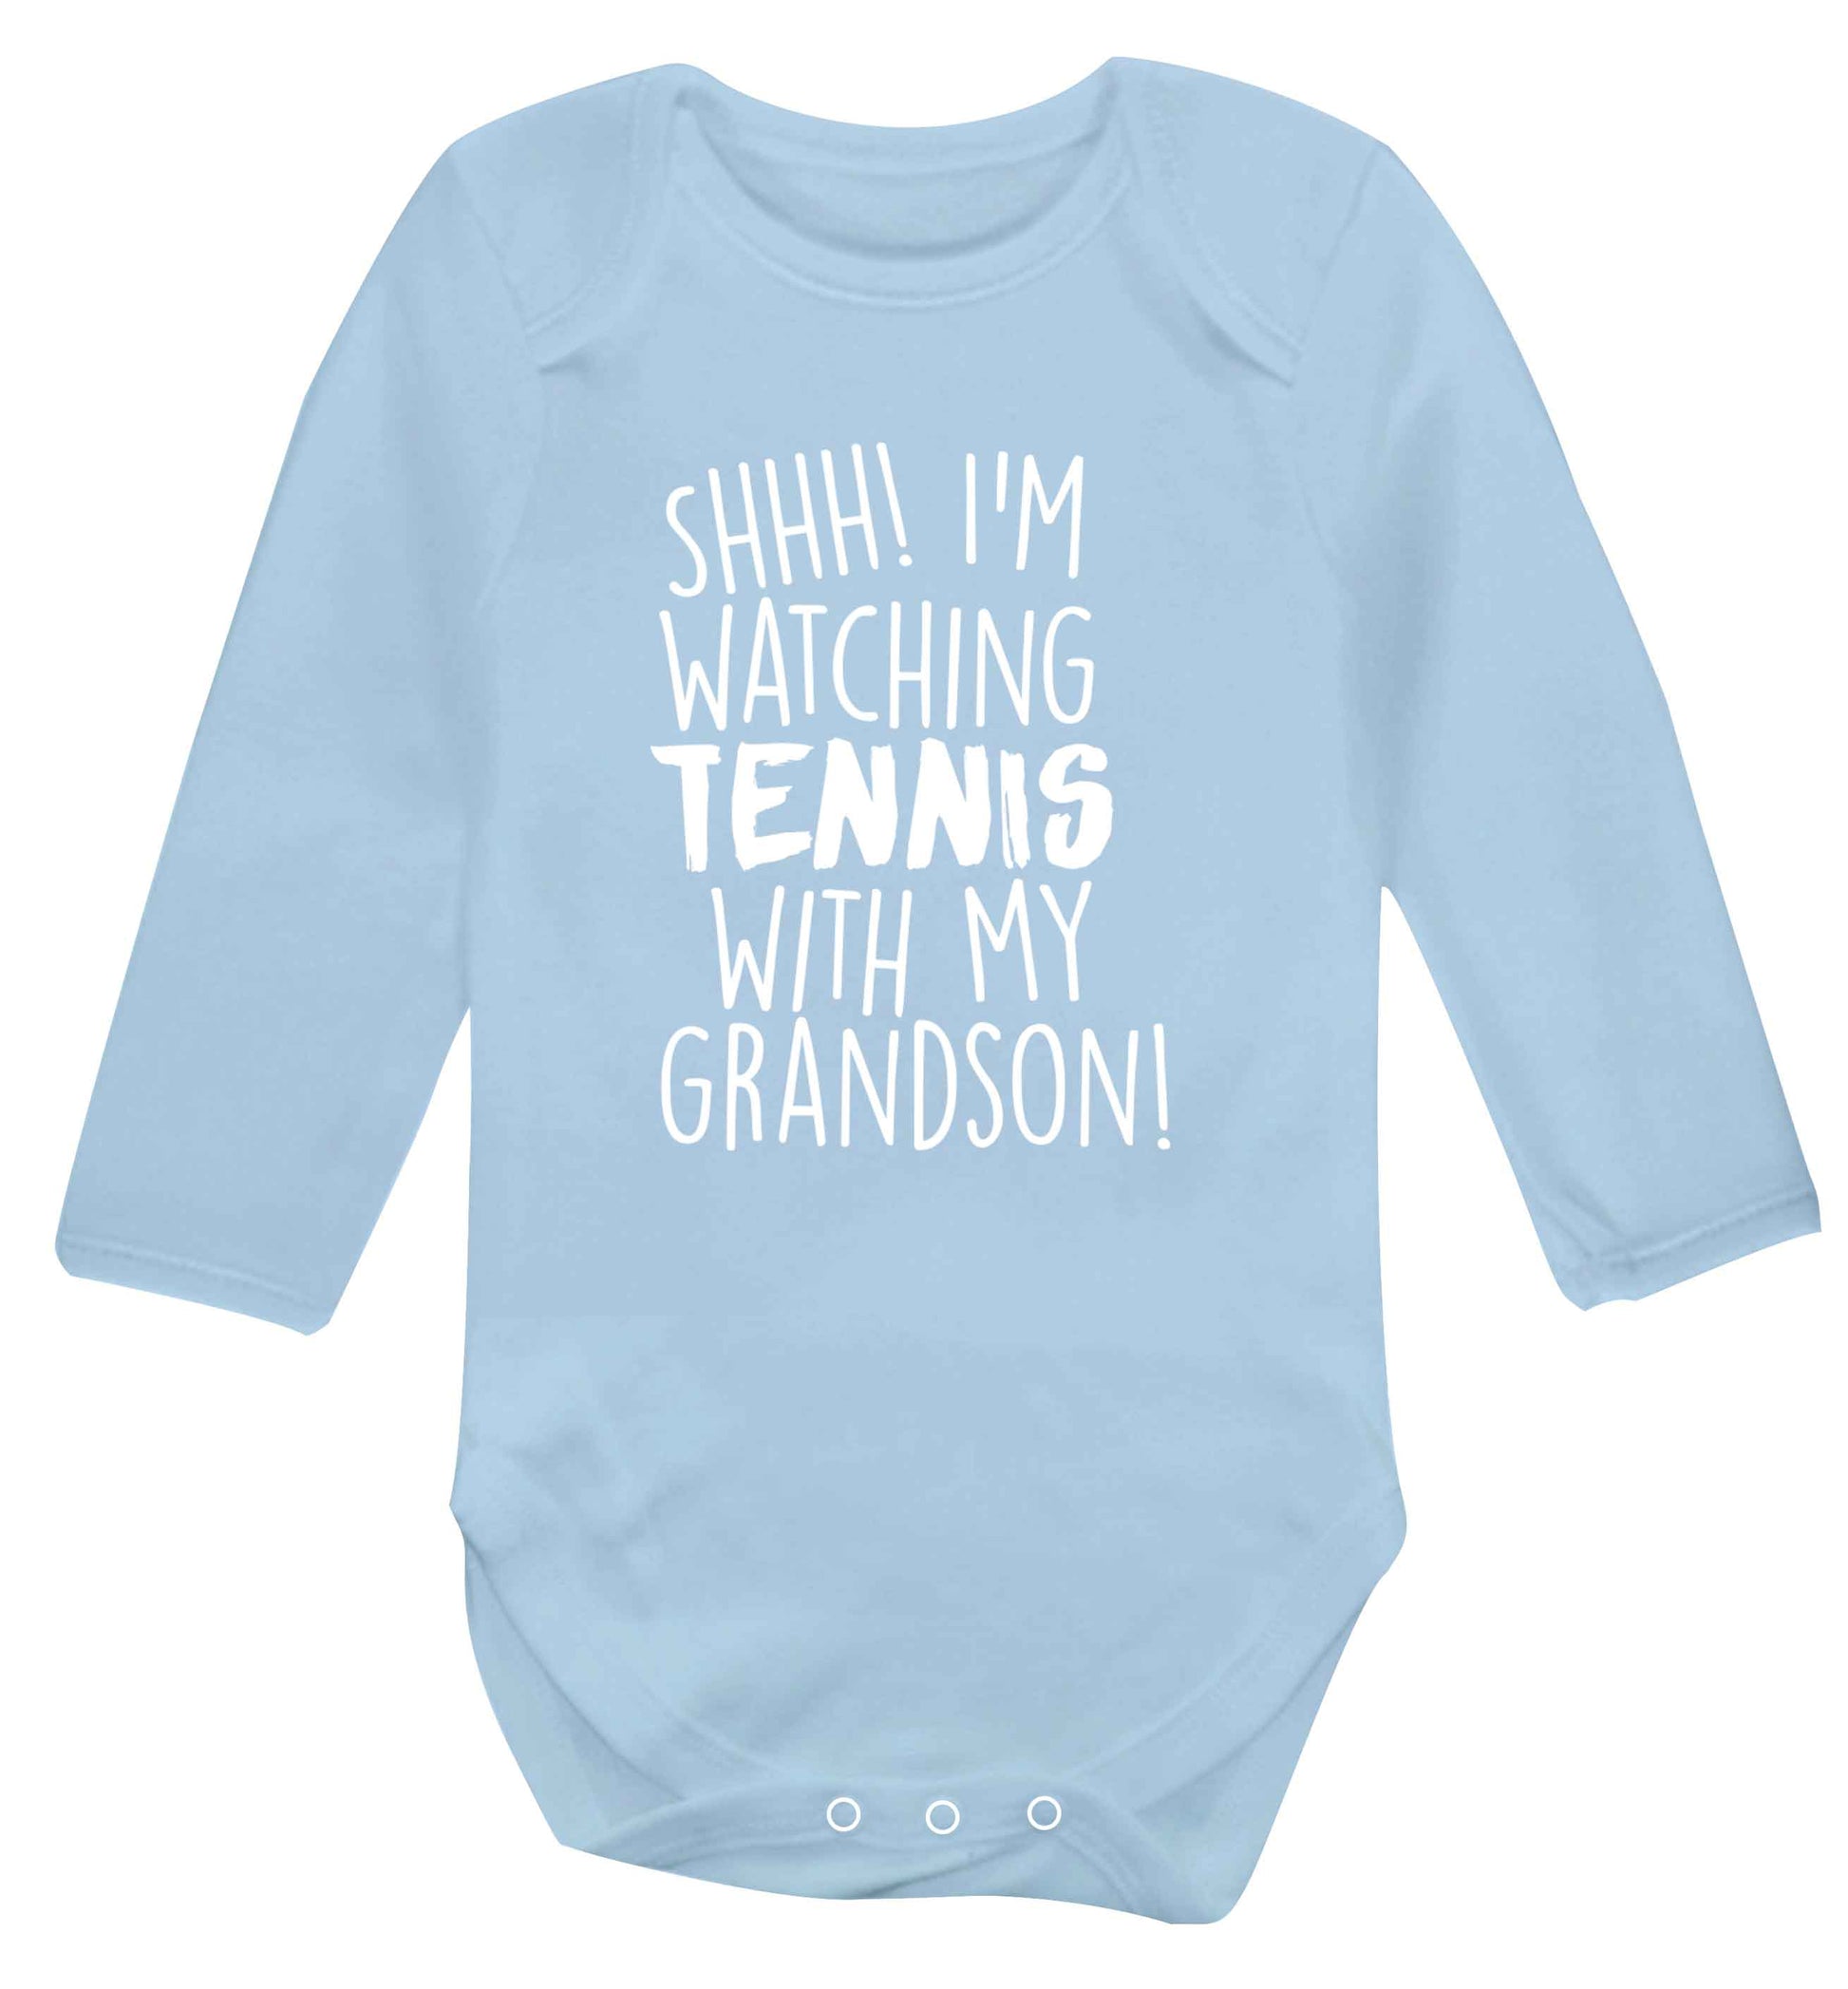 Shh! I'm watching tennis with my grandson! Baby Vest long sleeved pale blue 6-12 months